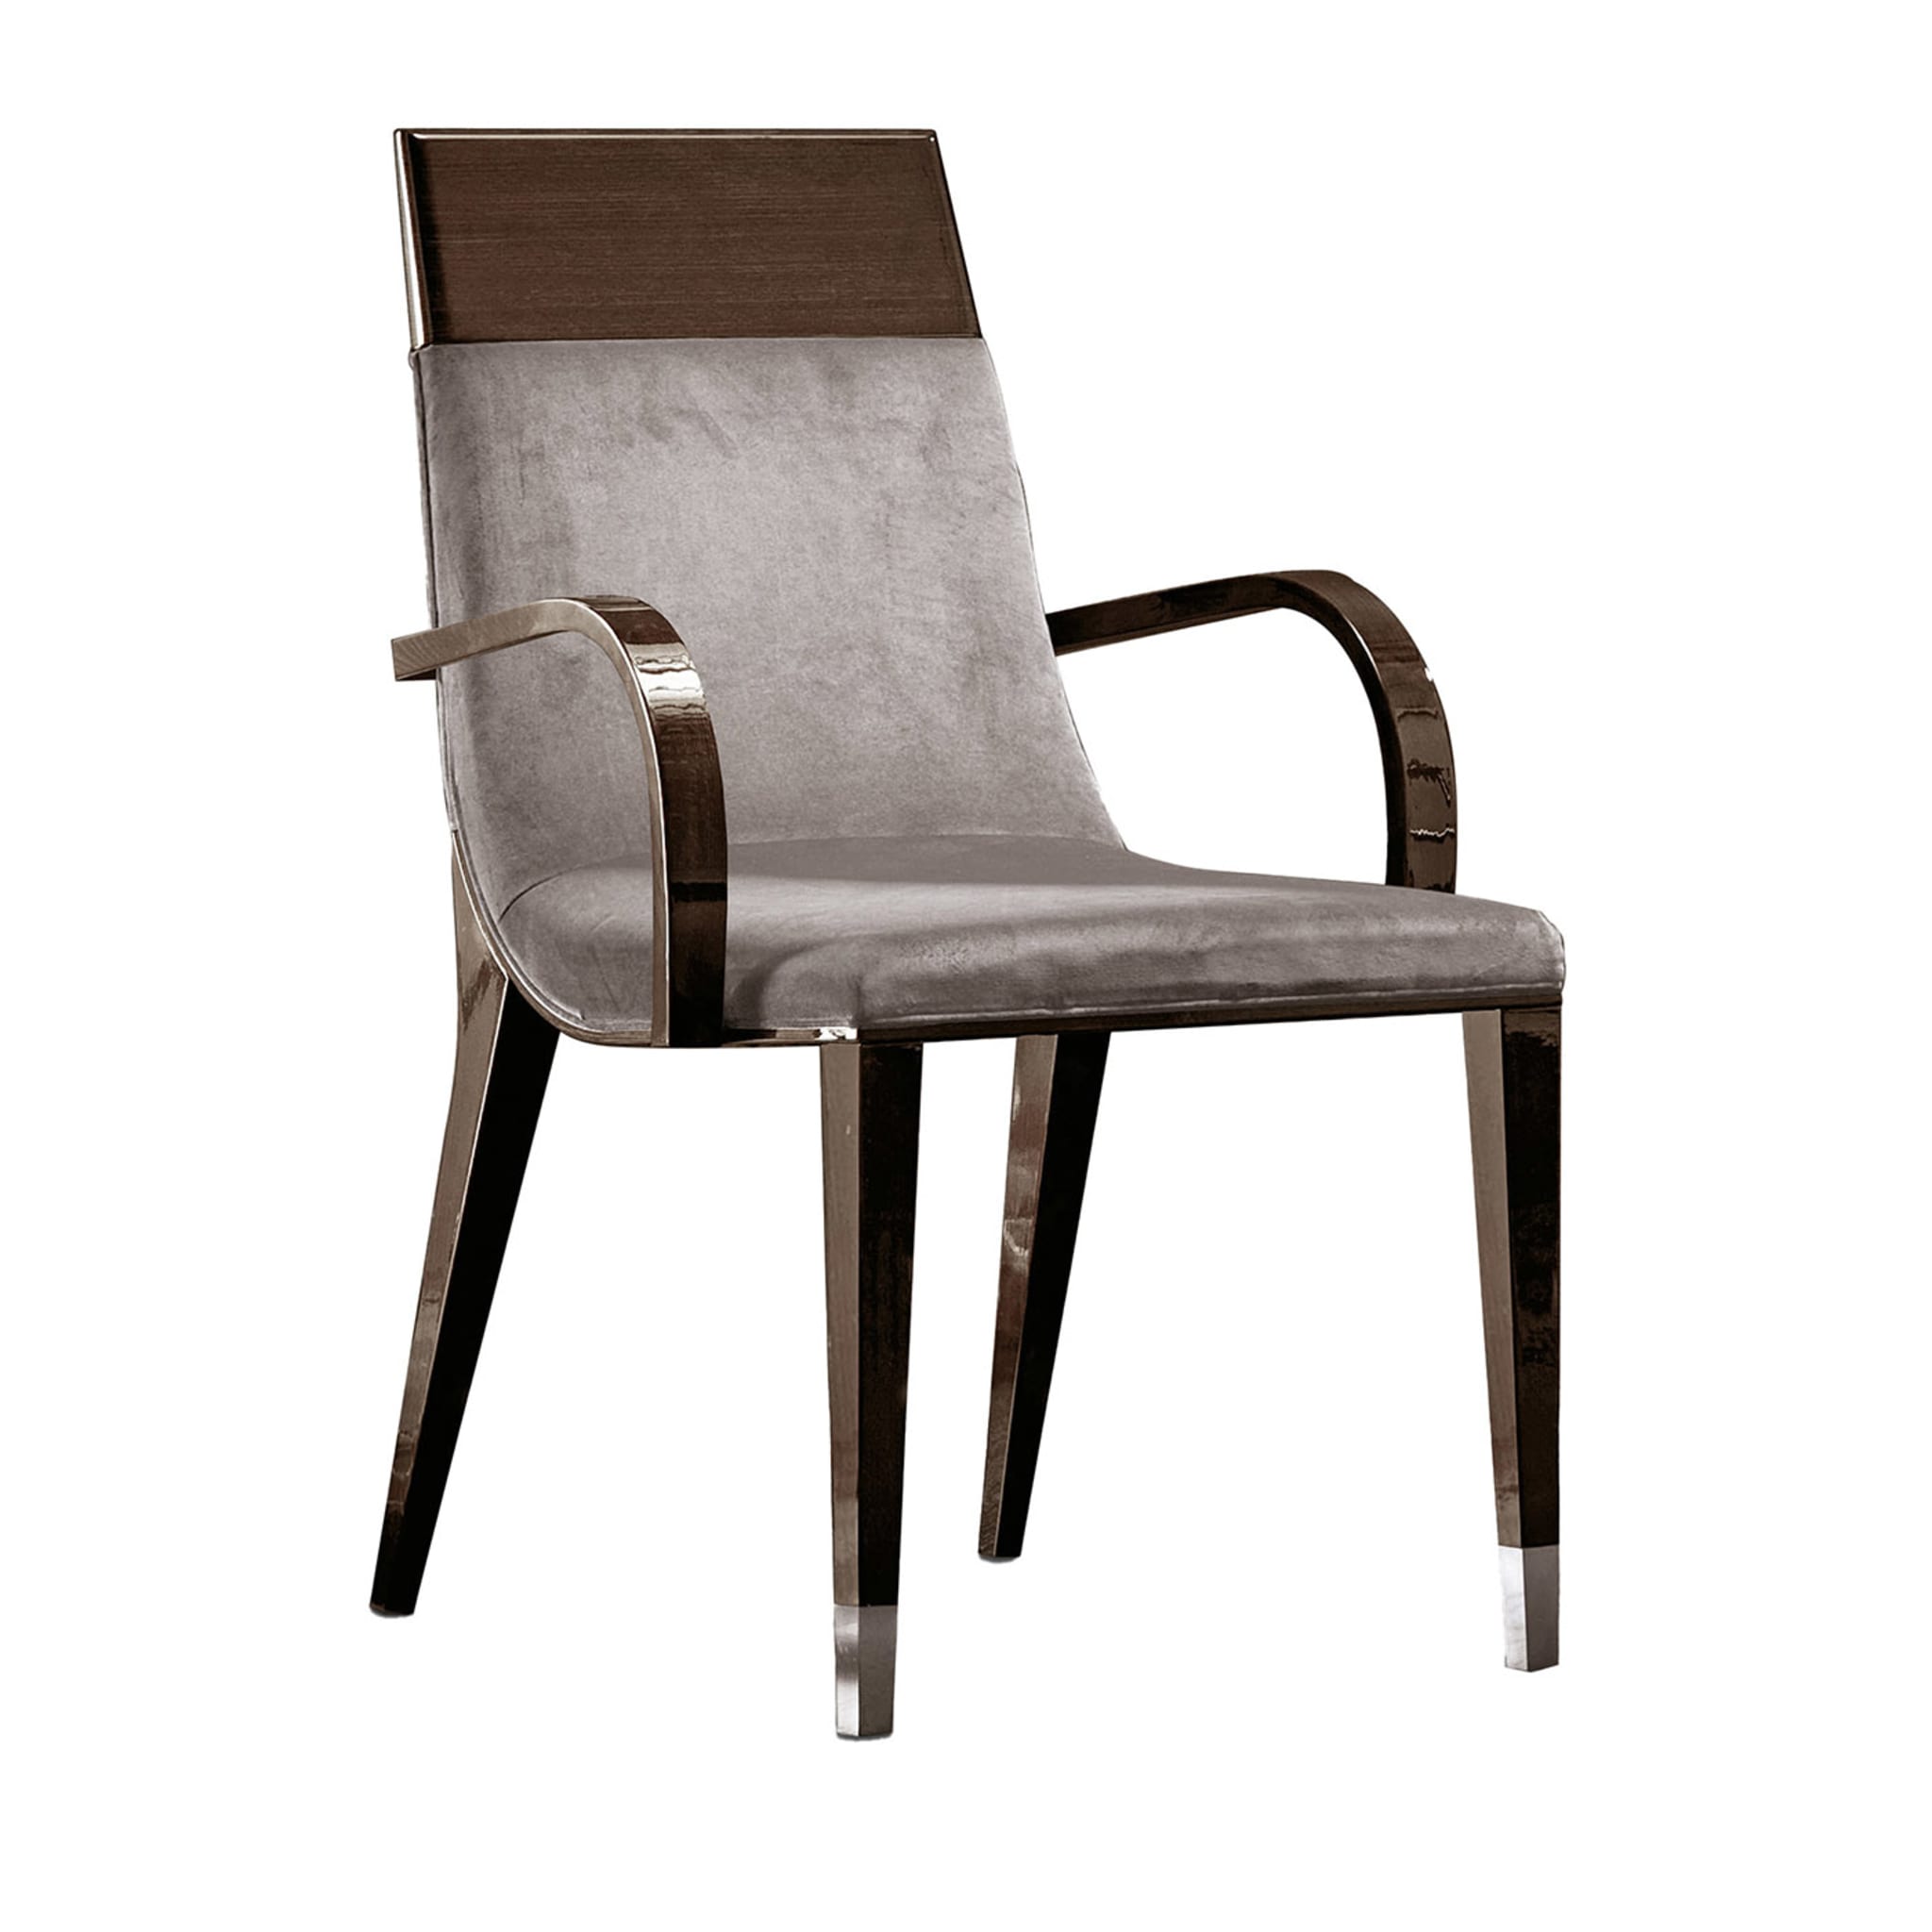 Absolute Gray and Brown fabric Chair with Armrests - Main view